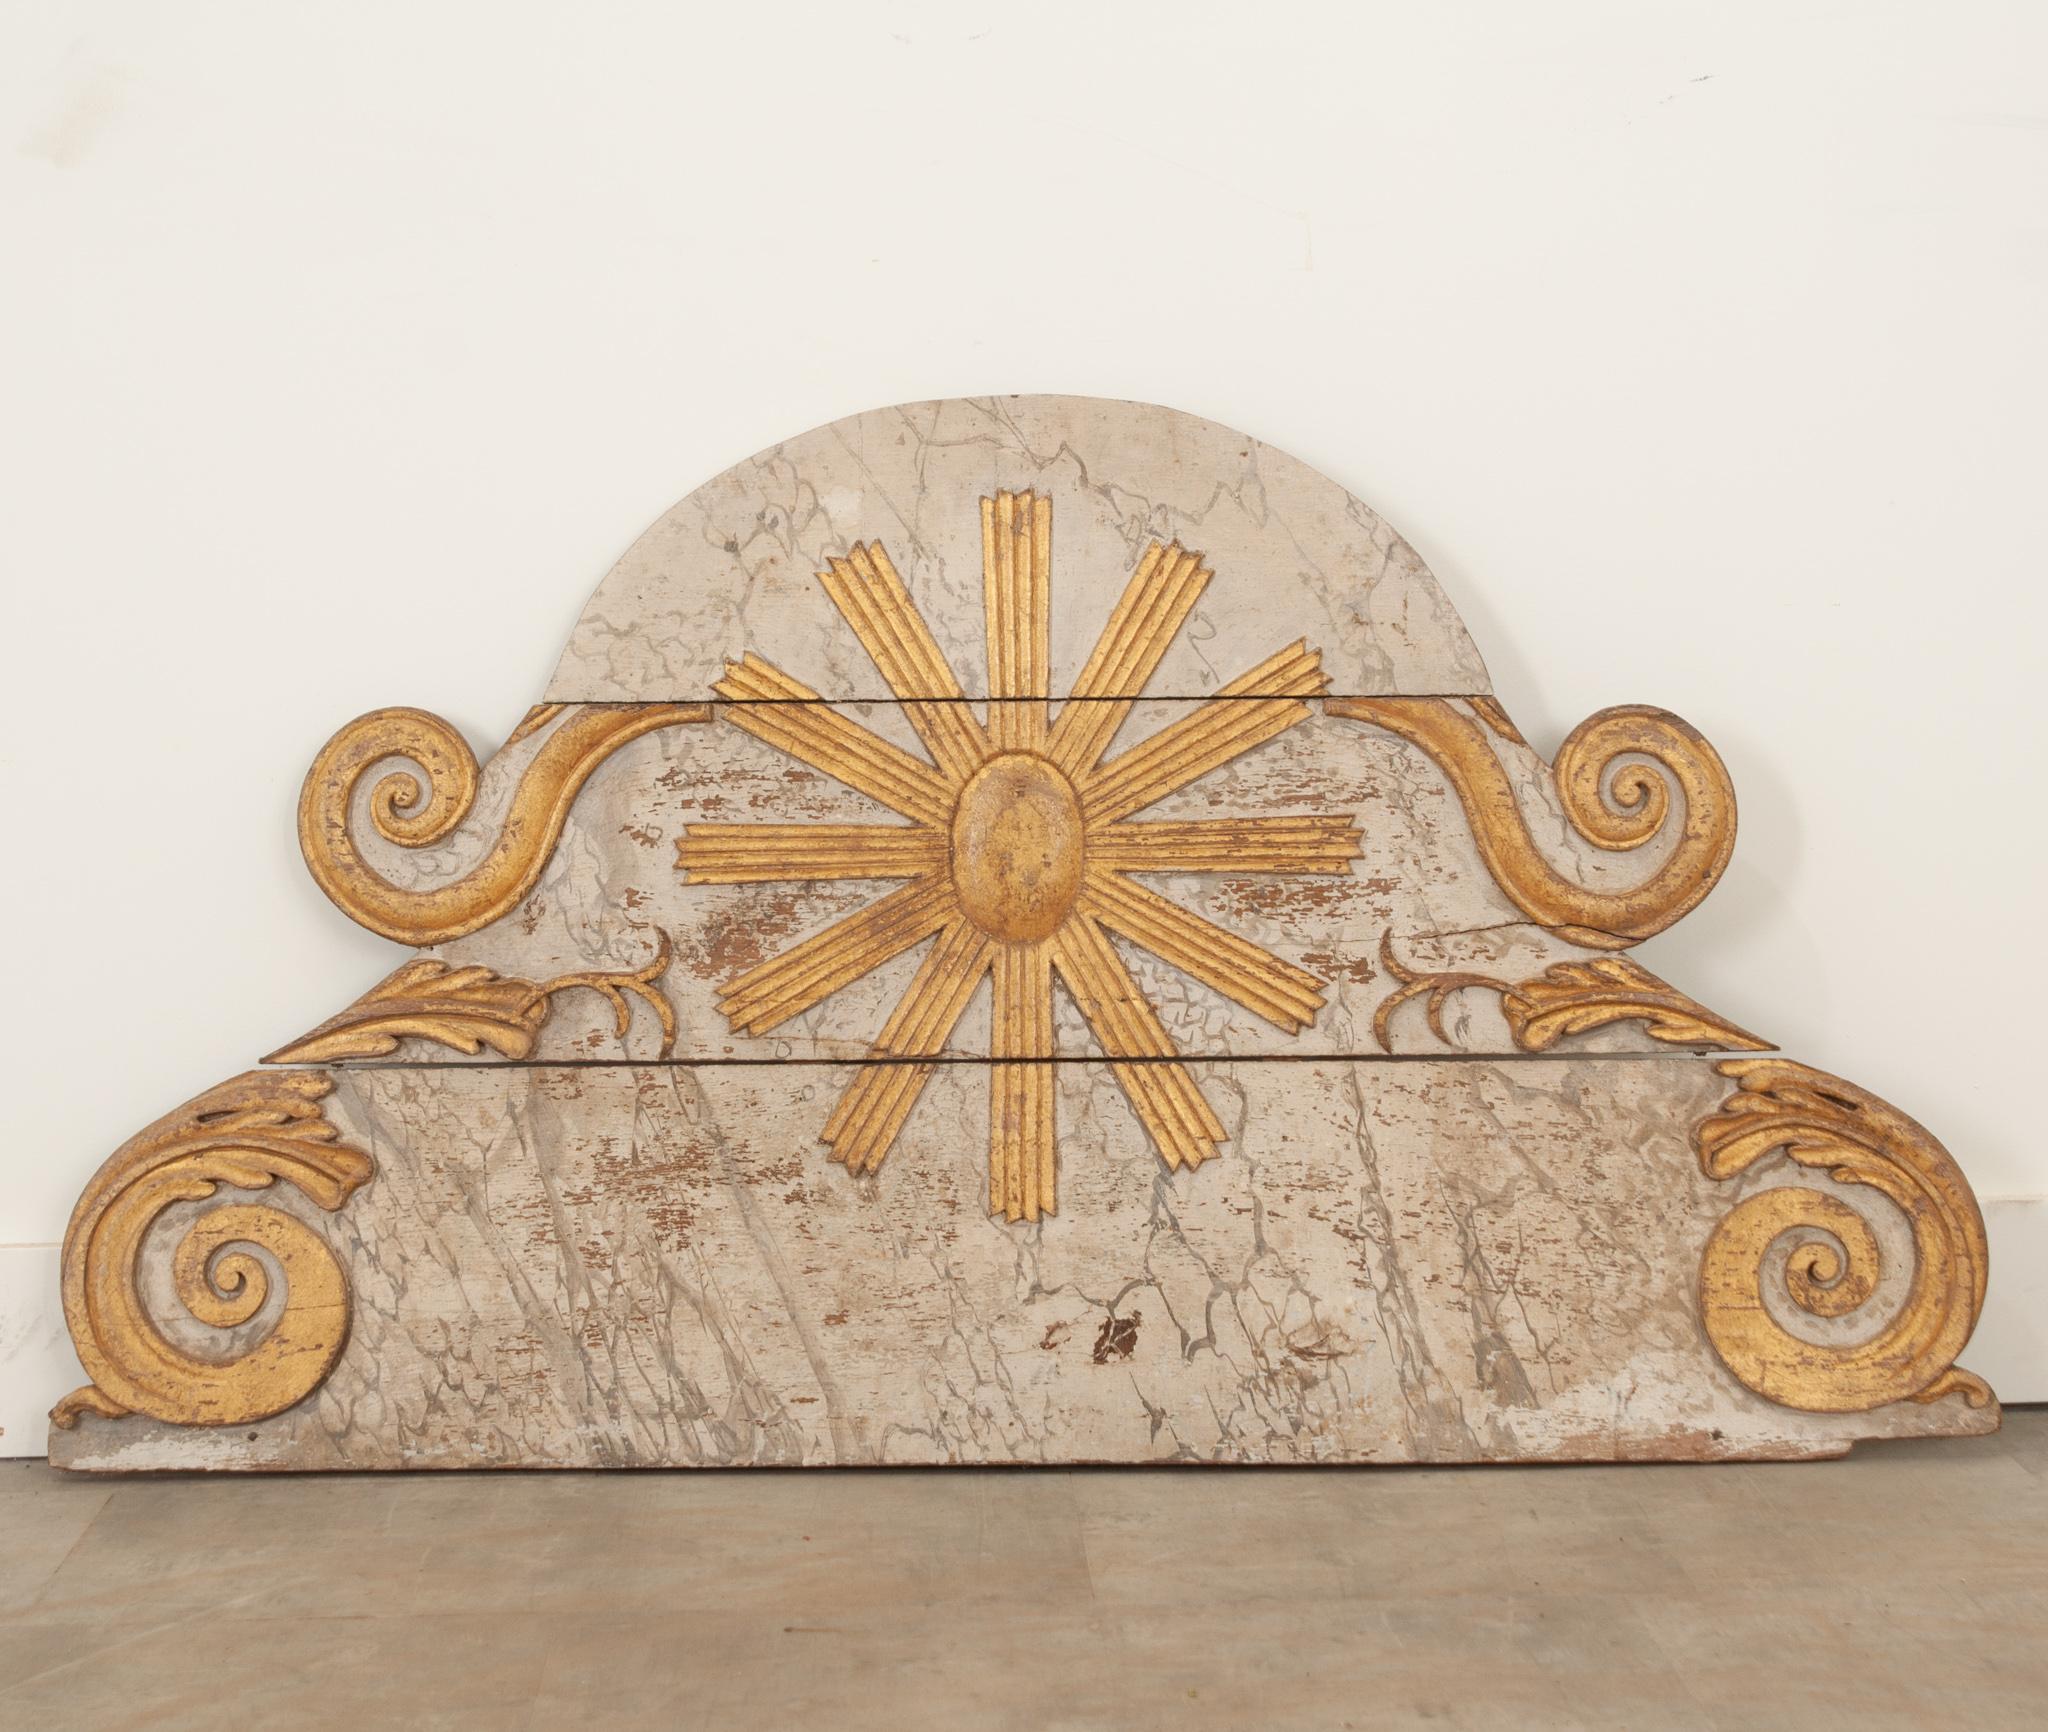 This eye-catching architectural panel will add whimsy to any interior, there are so many ways to incorporate this wonderful carving in any home. The panel is made of three boards, painted with a faux-marbled finish with a carved gold gilt starburst